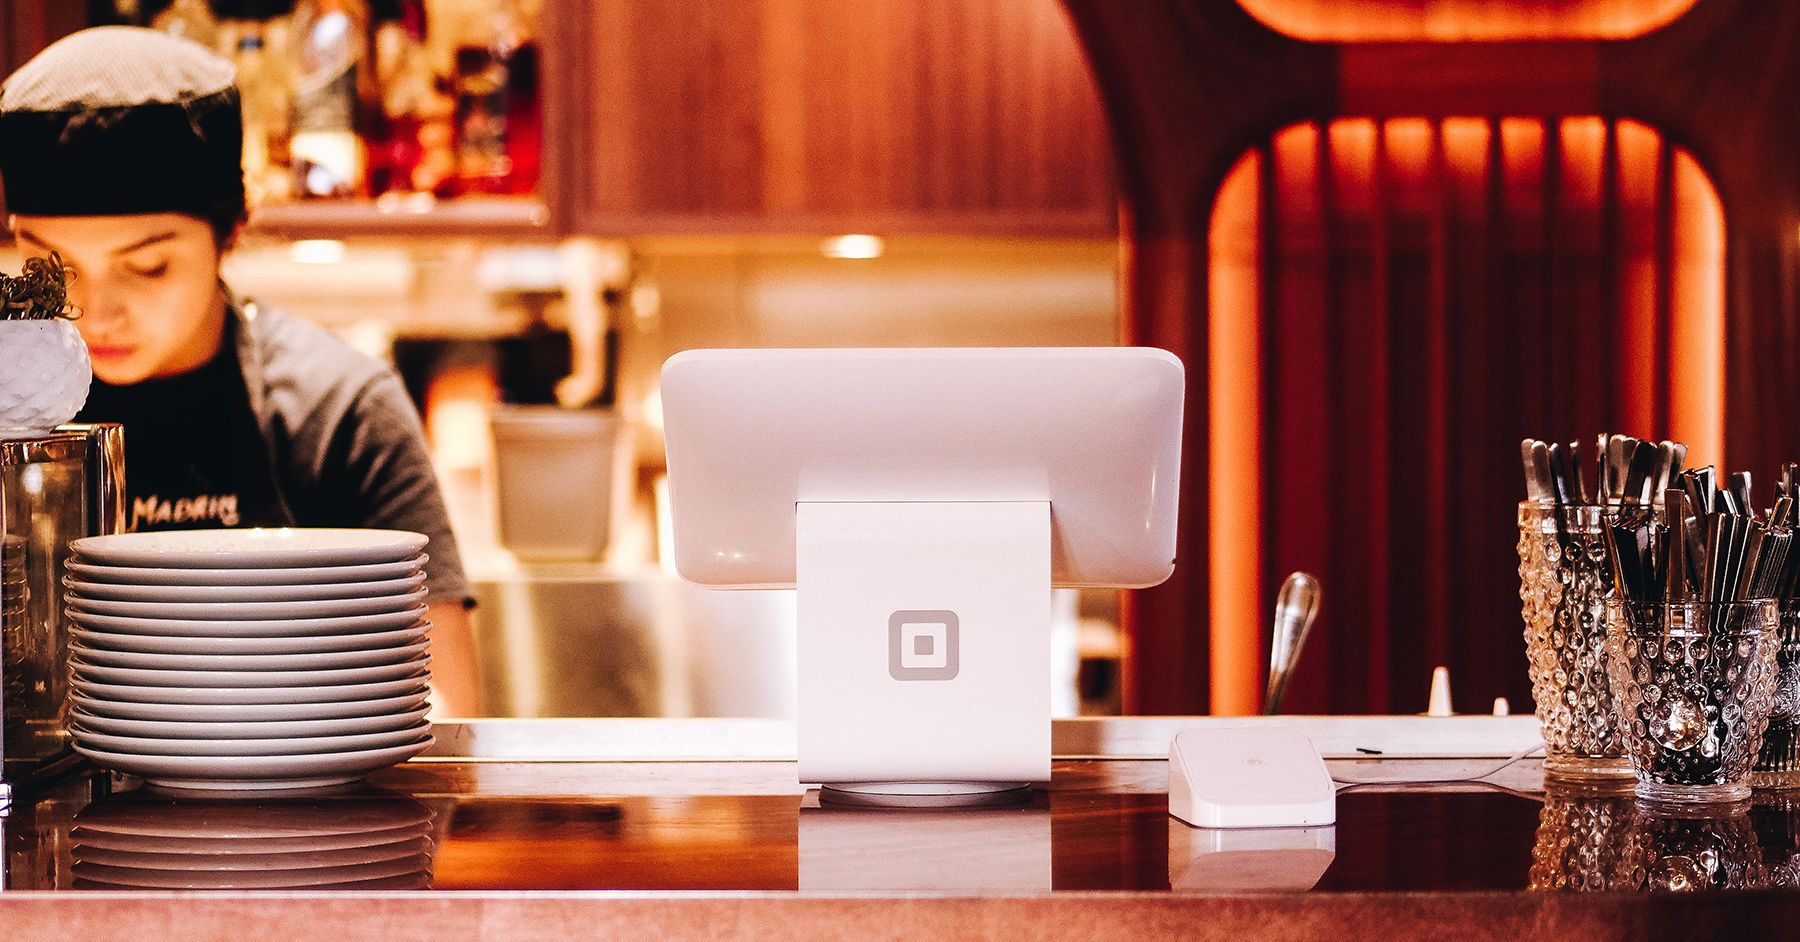 Kitchens optimized for delivery: Delivery Hero’s favourites